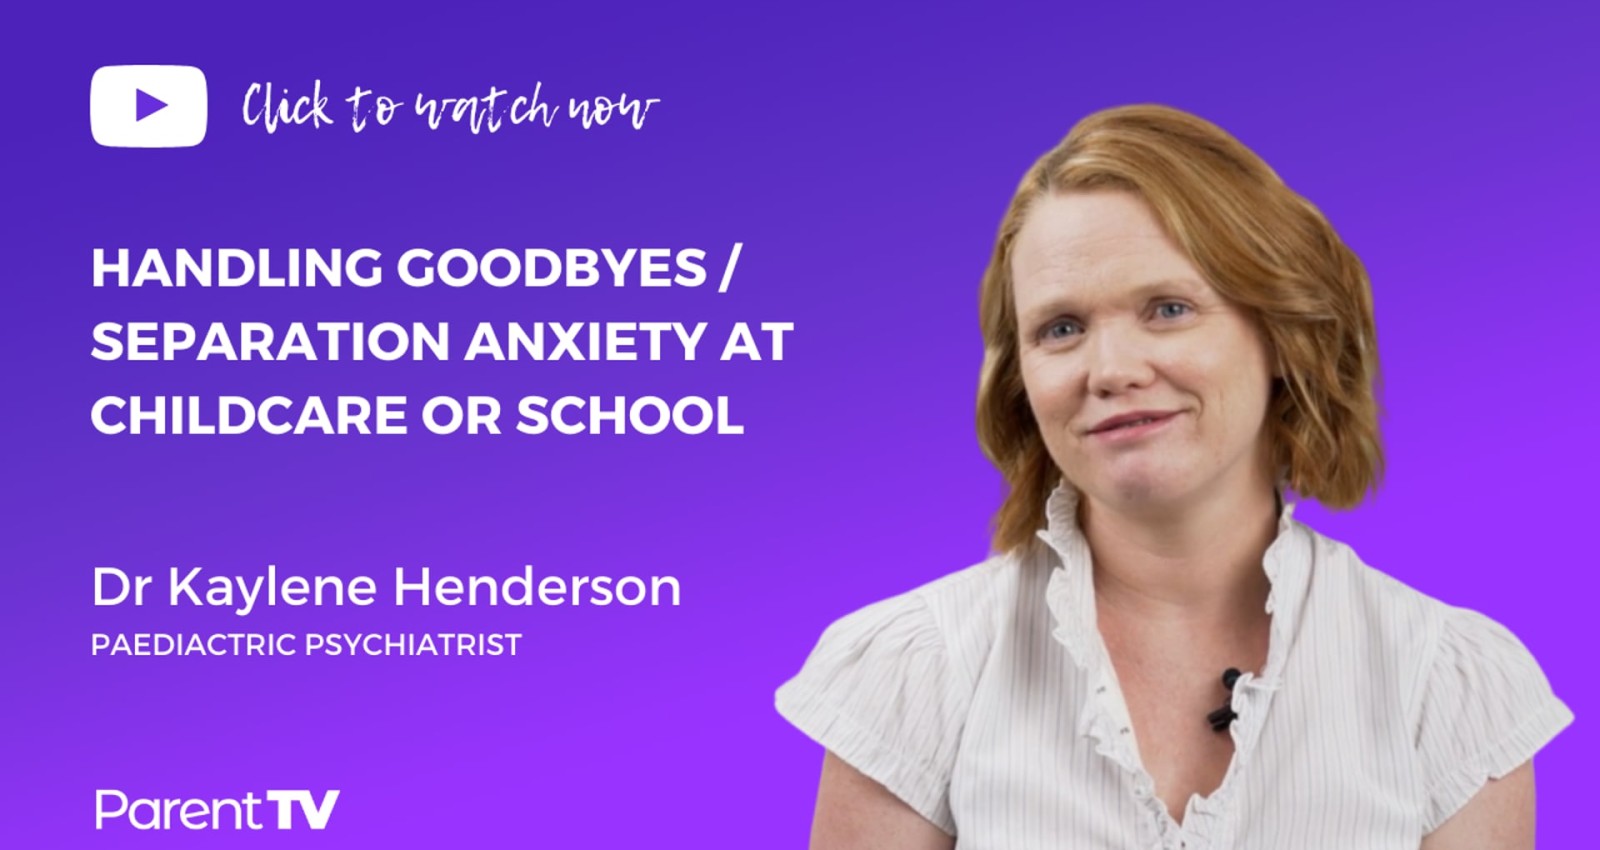 Handling goodbyes / separation anxiety at childcare or school